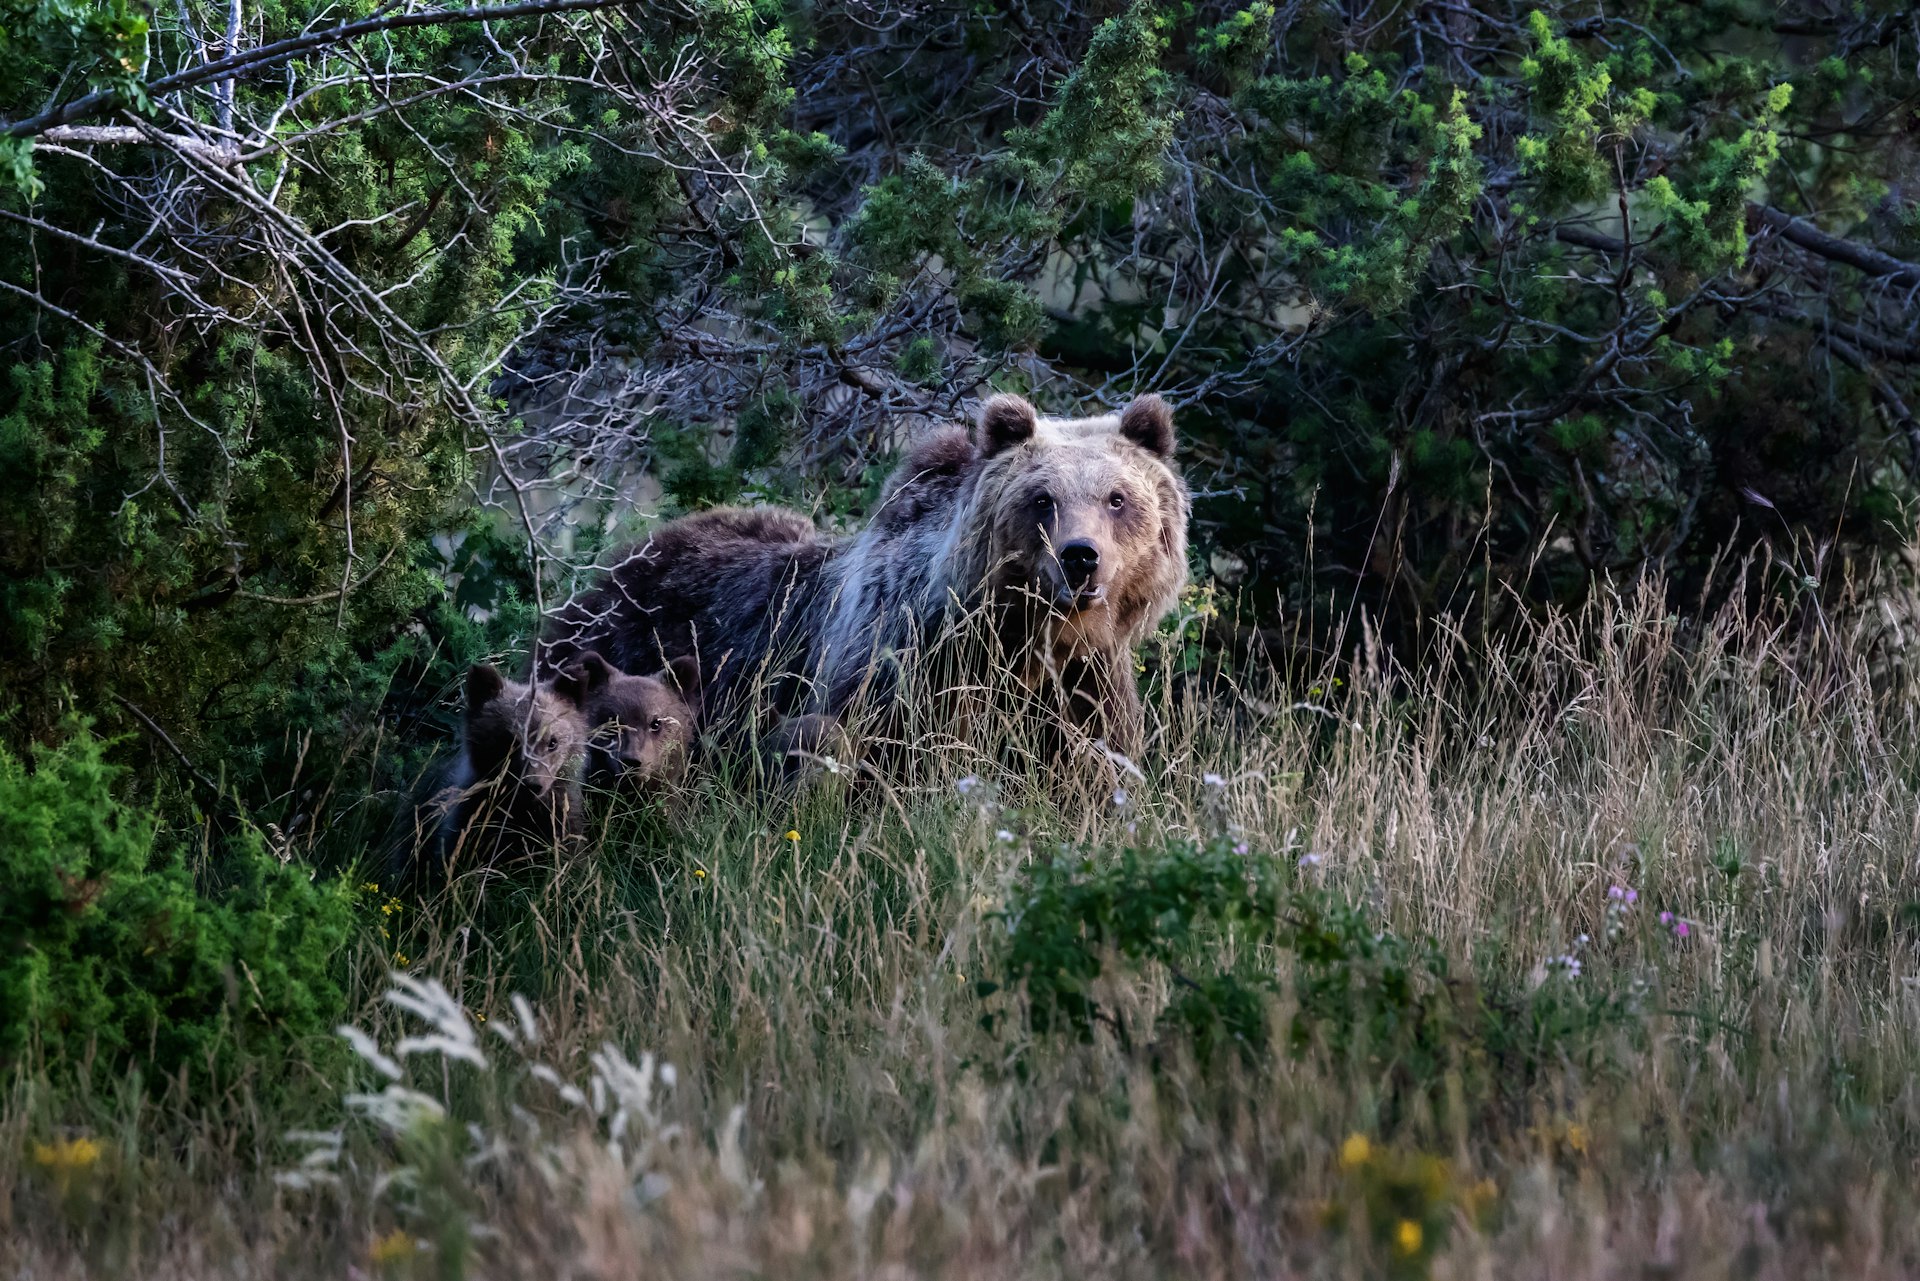 A Marsican bear emerges from a bush with her cubs in the Abruzzo region of Italy.